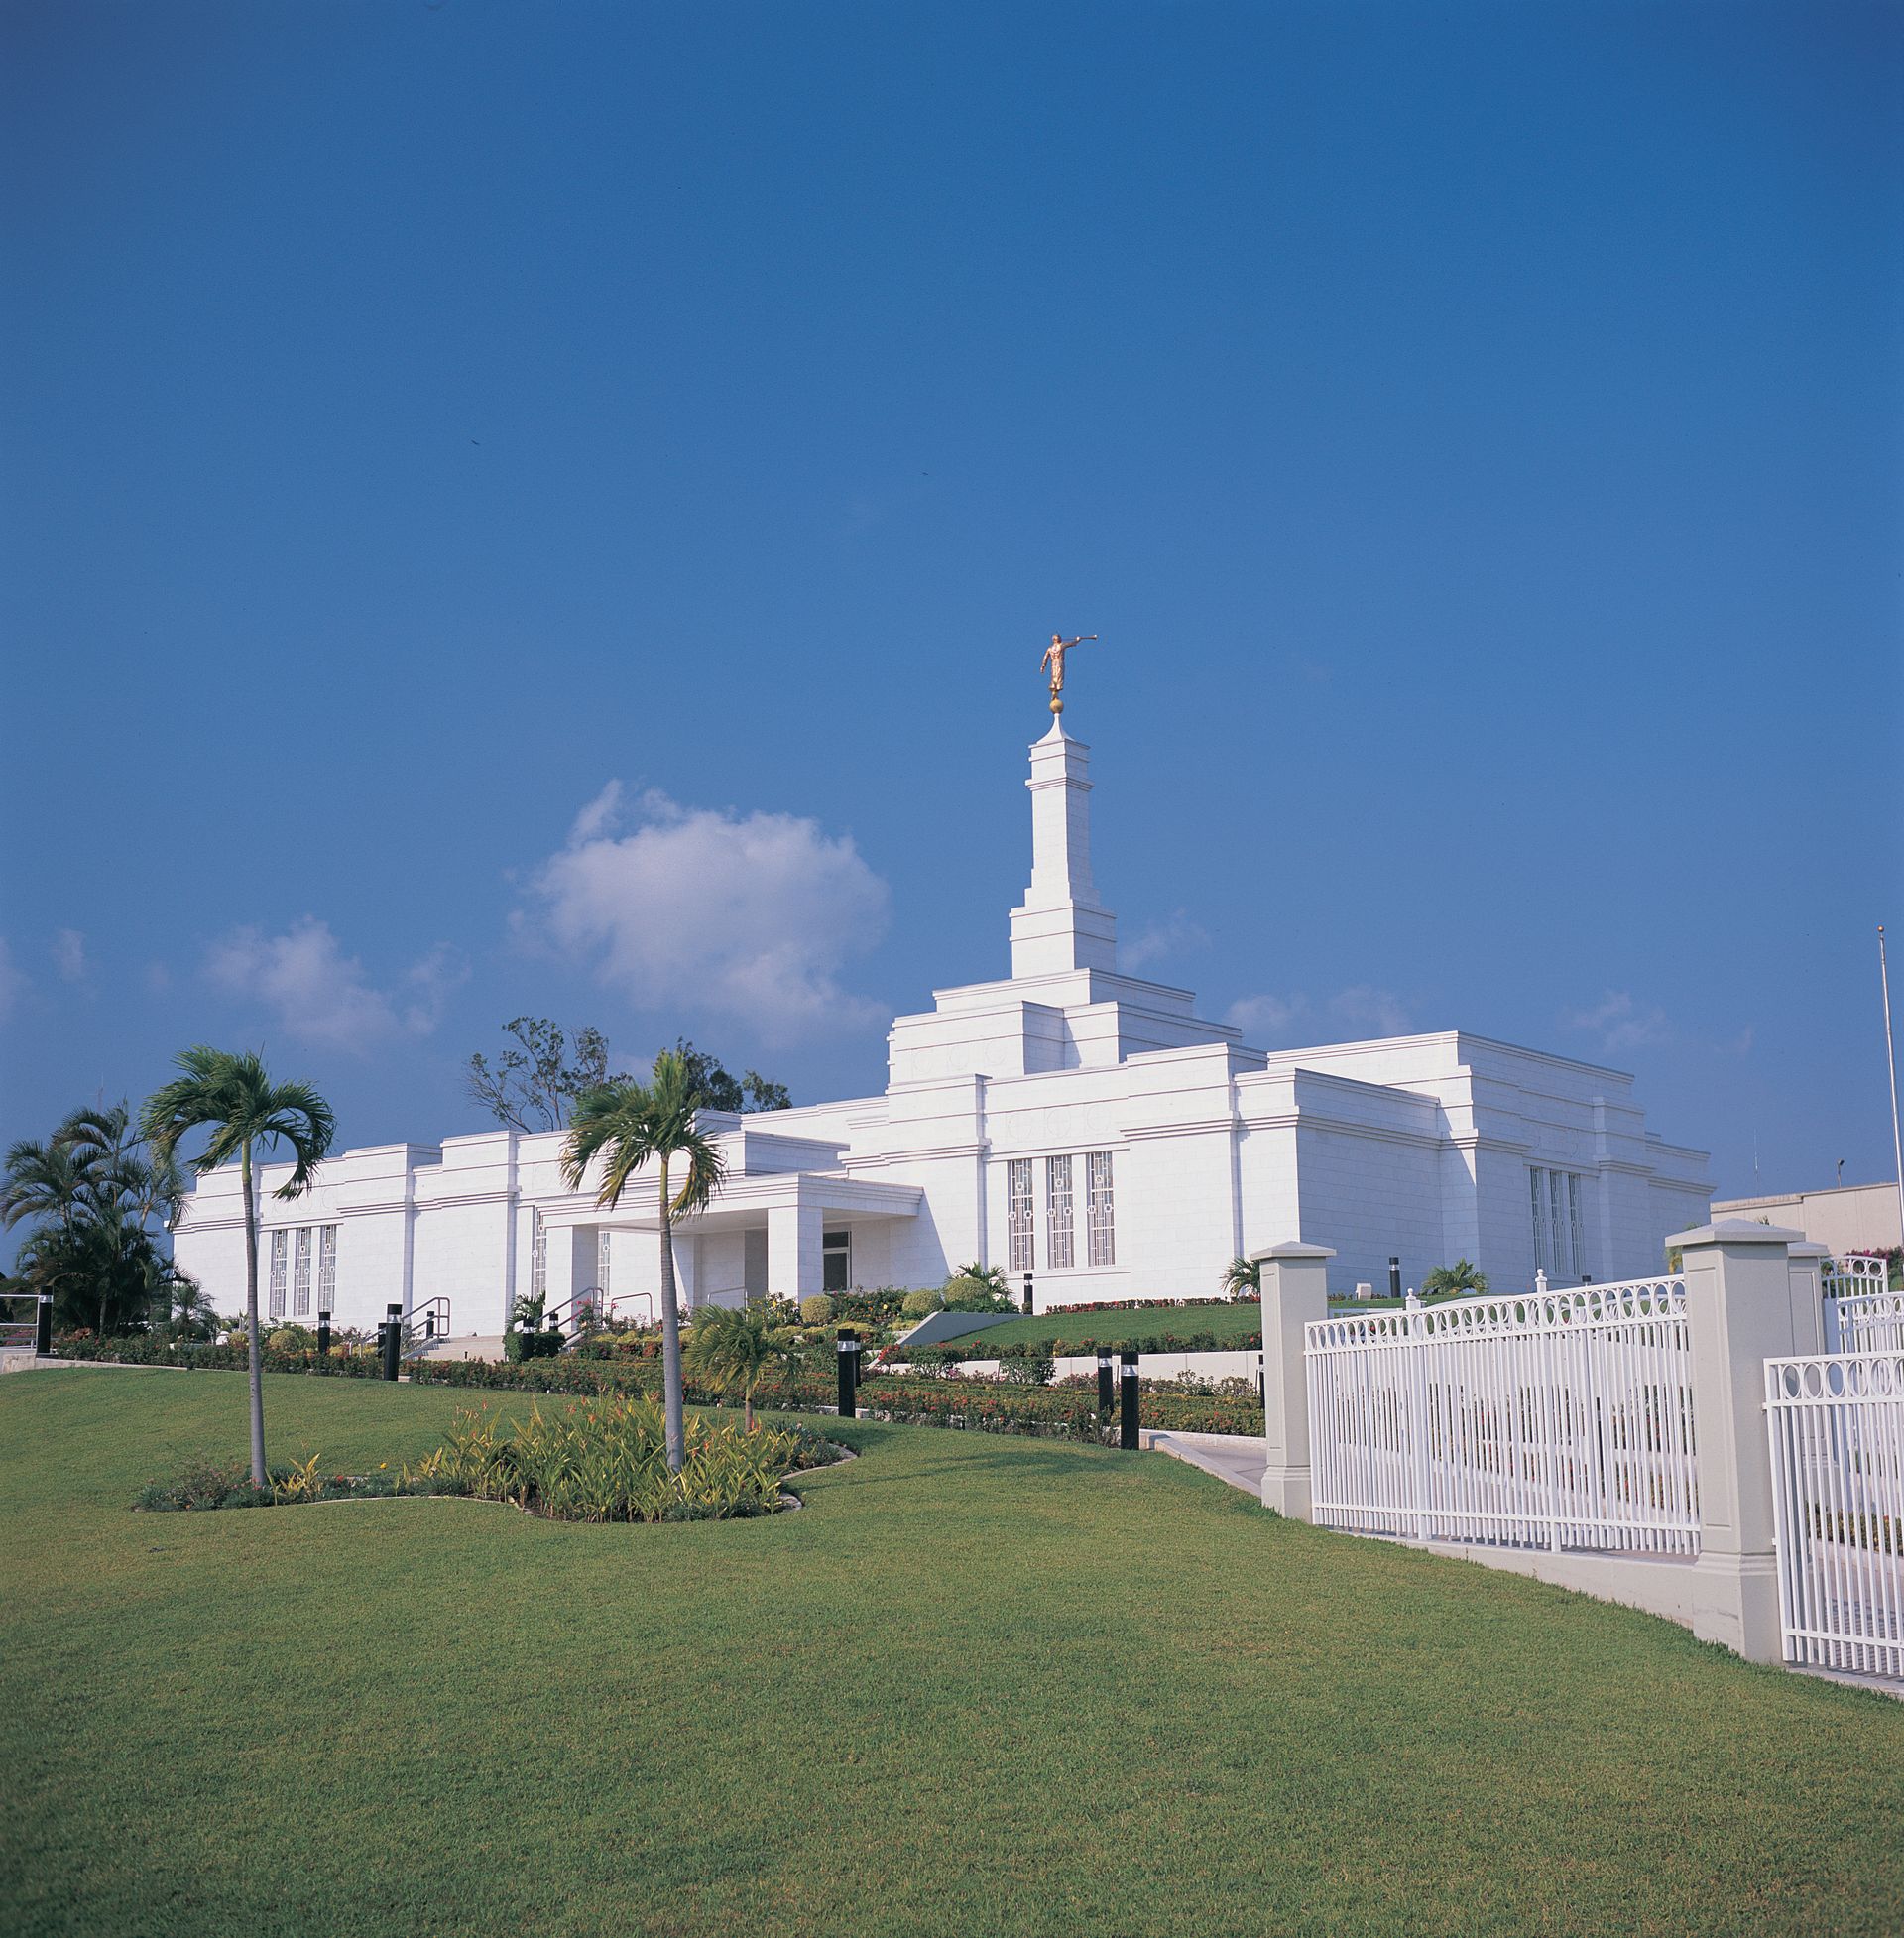 The Tampico Mexico Temple, including the scenery and entrance.